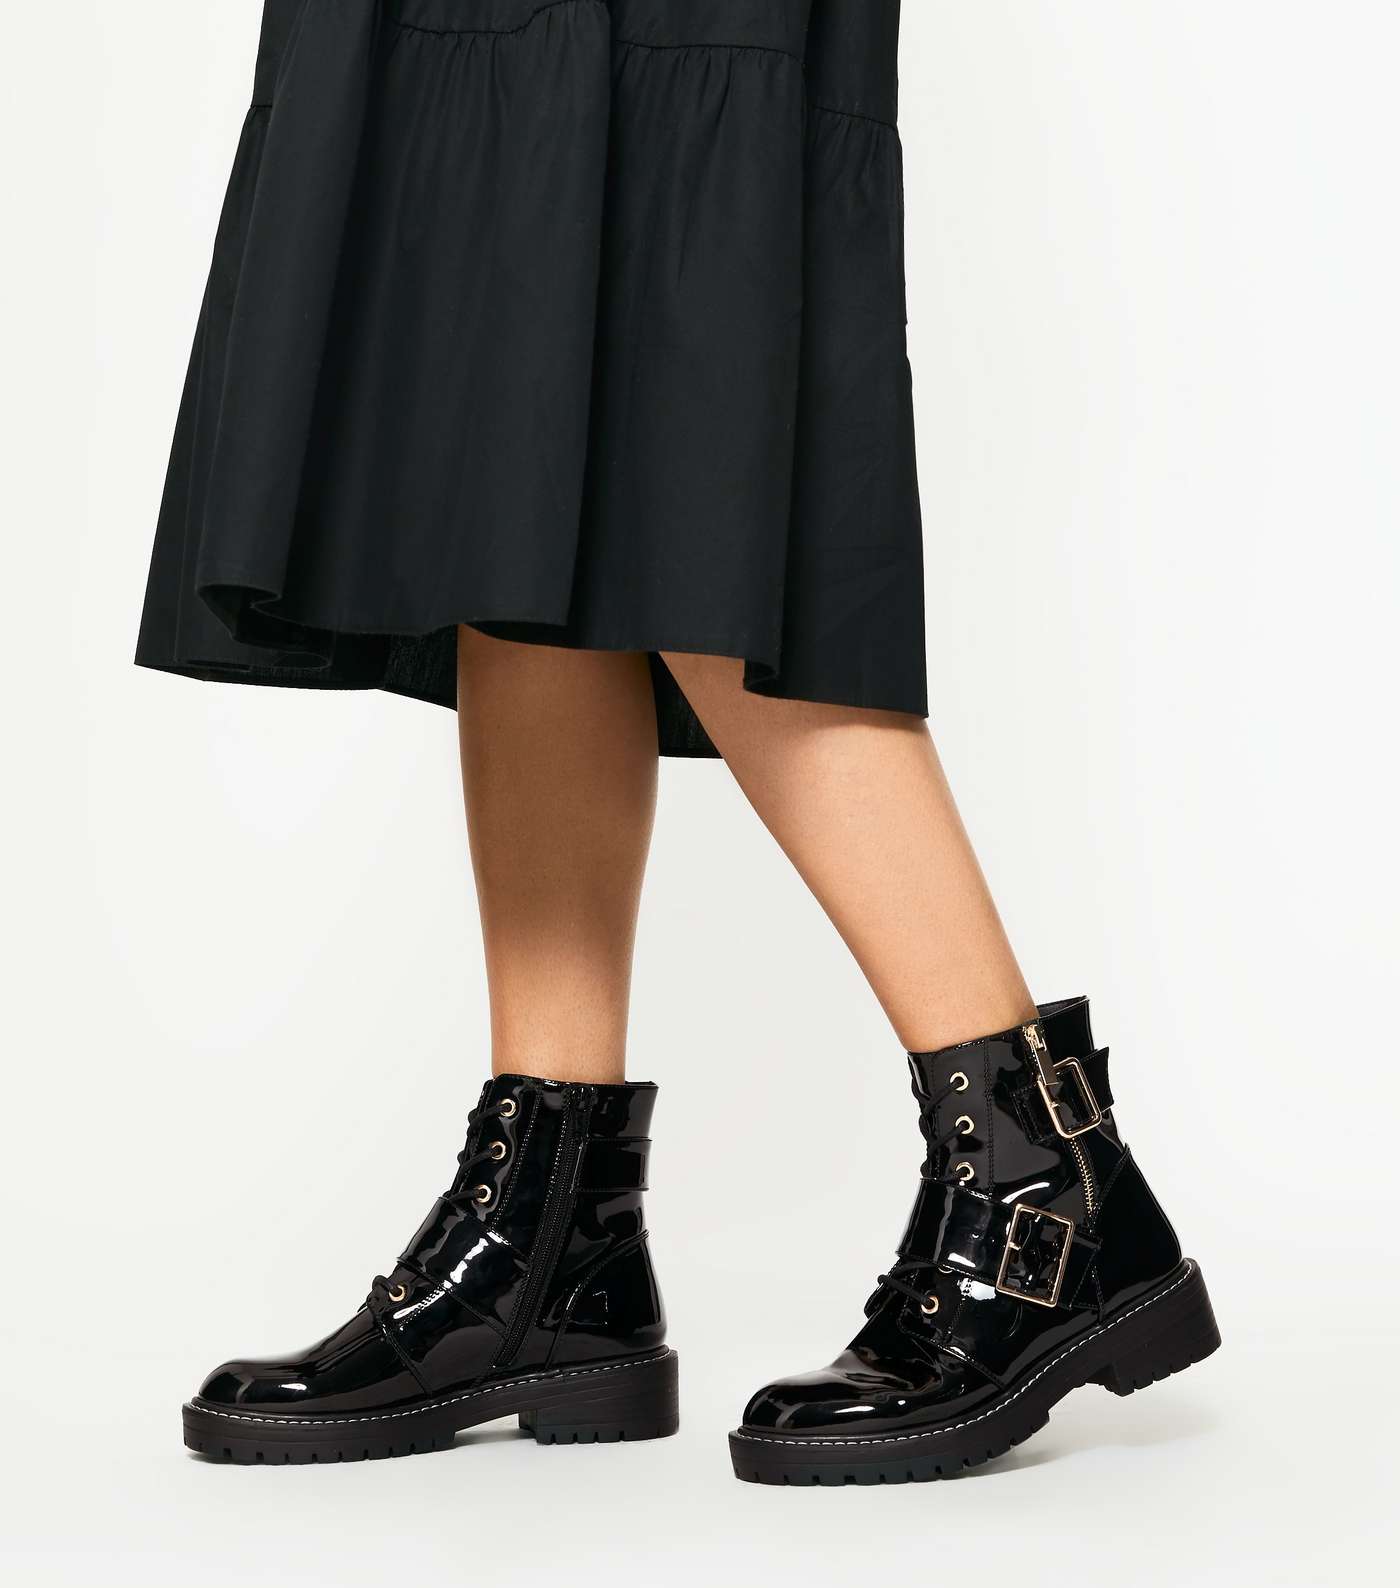 Black Patent Lace Up Buckle Boots